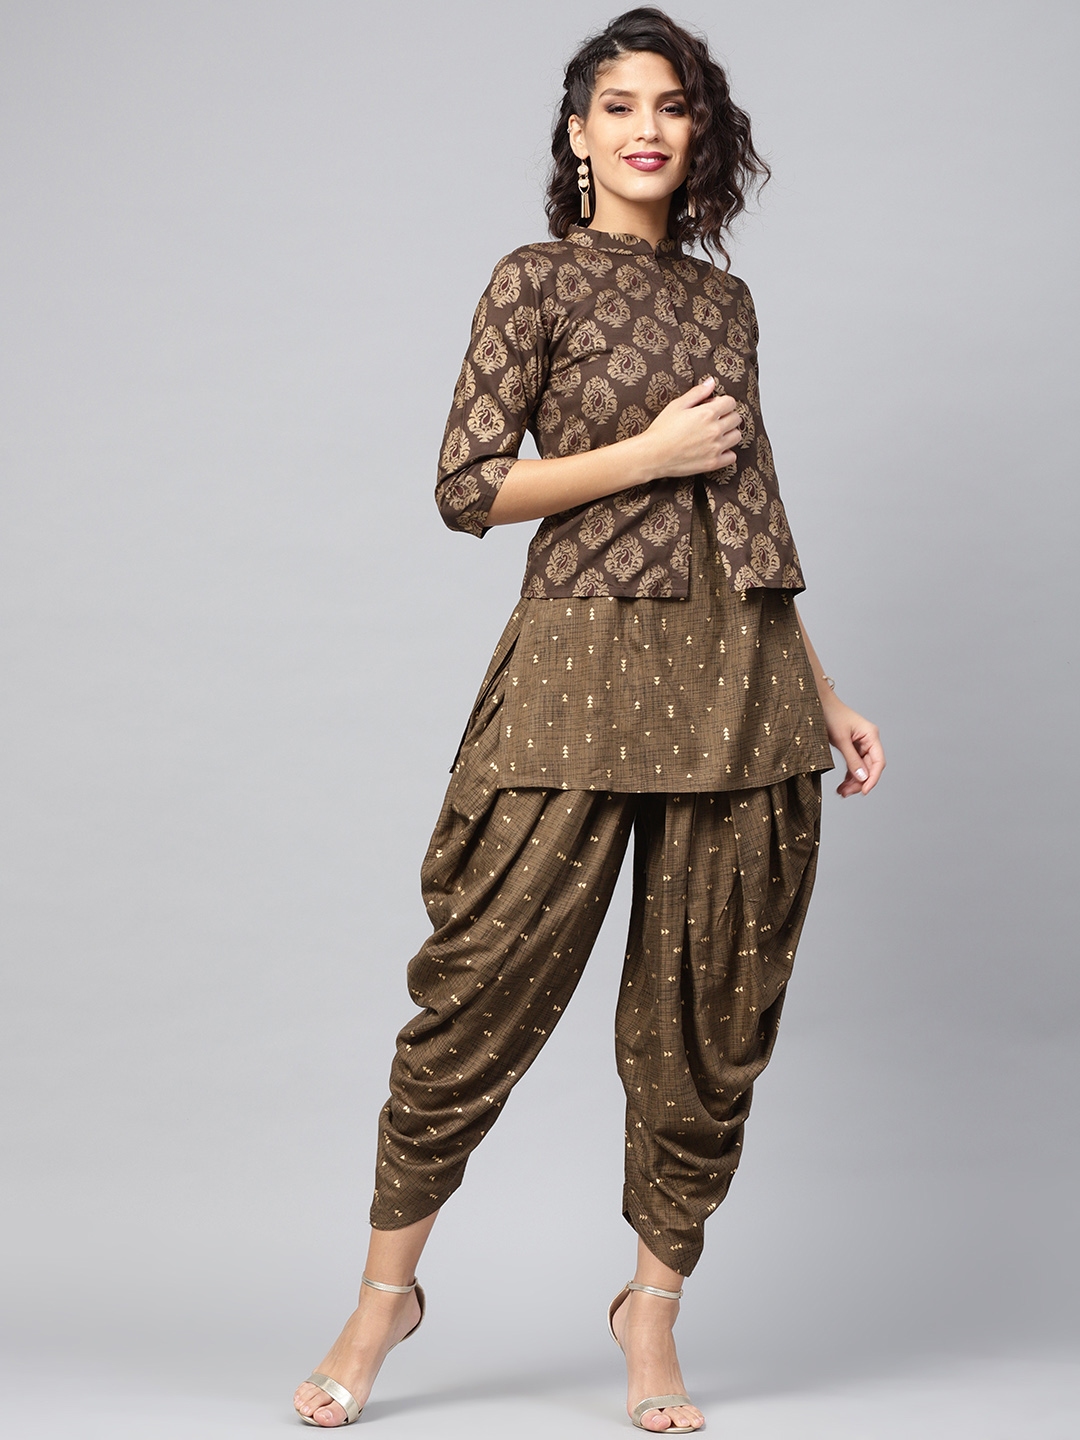 dhoti dress with jacket for girl